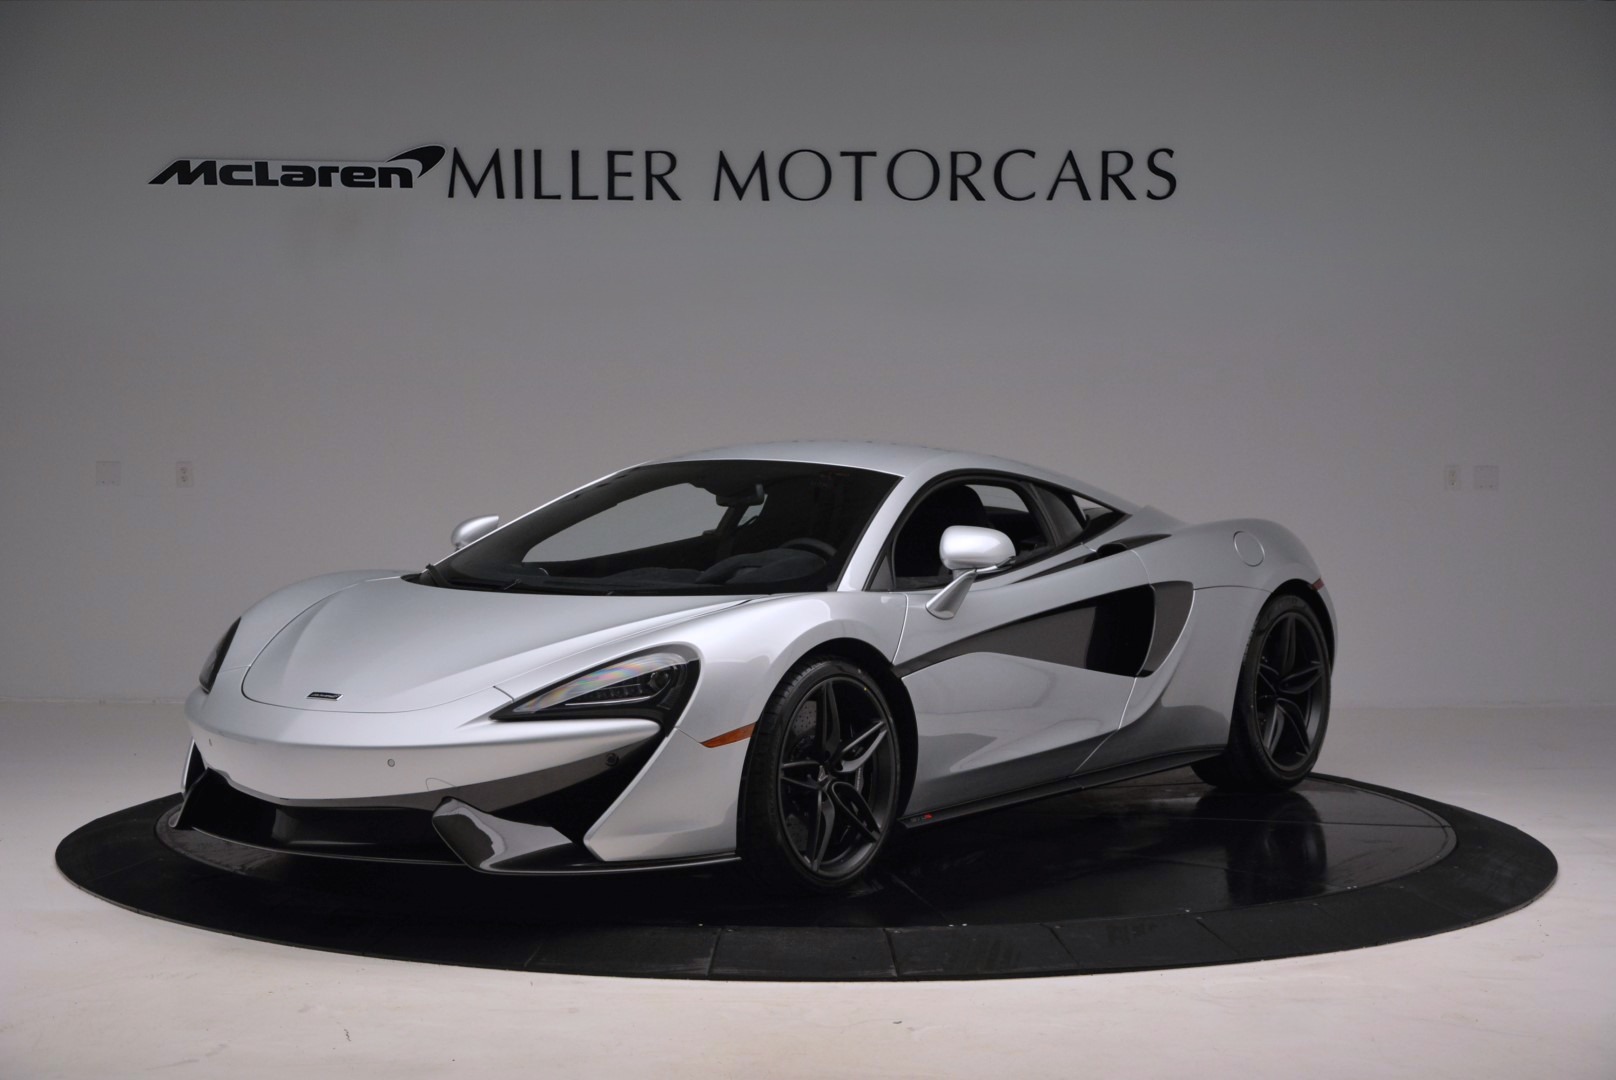 Used 2017 McLaren 570S for sale Sold at Rolls-Royce Motor Cars Greenwich in Greenwich CT 06830 1